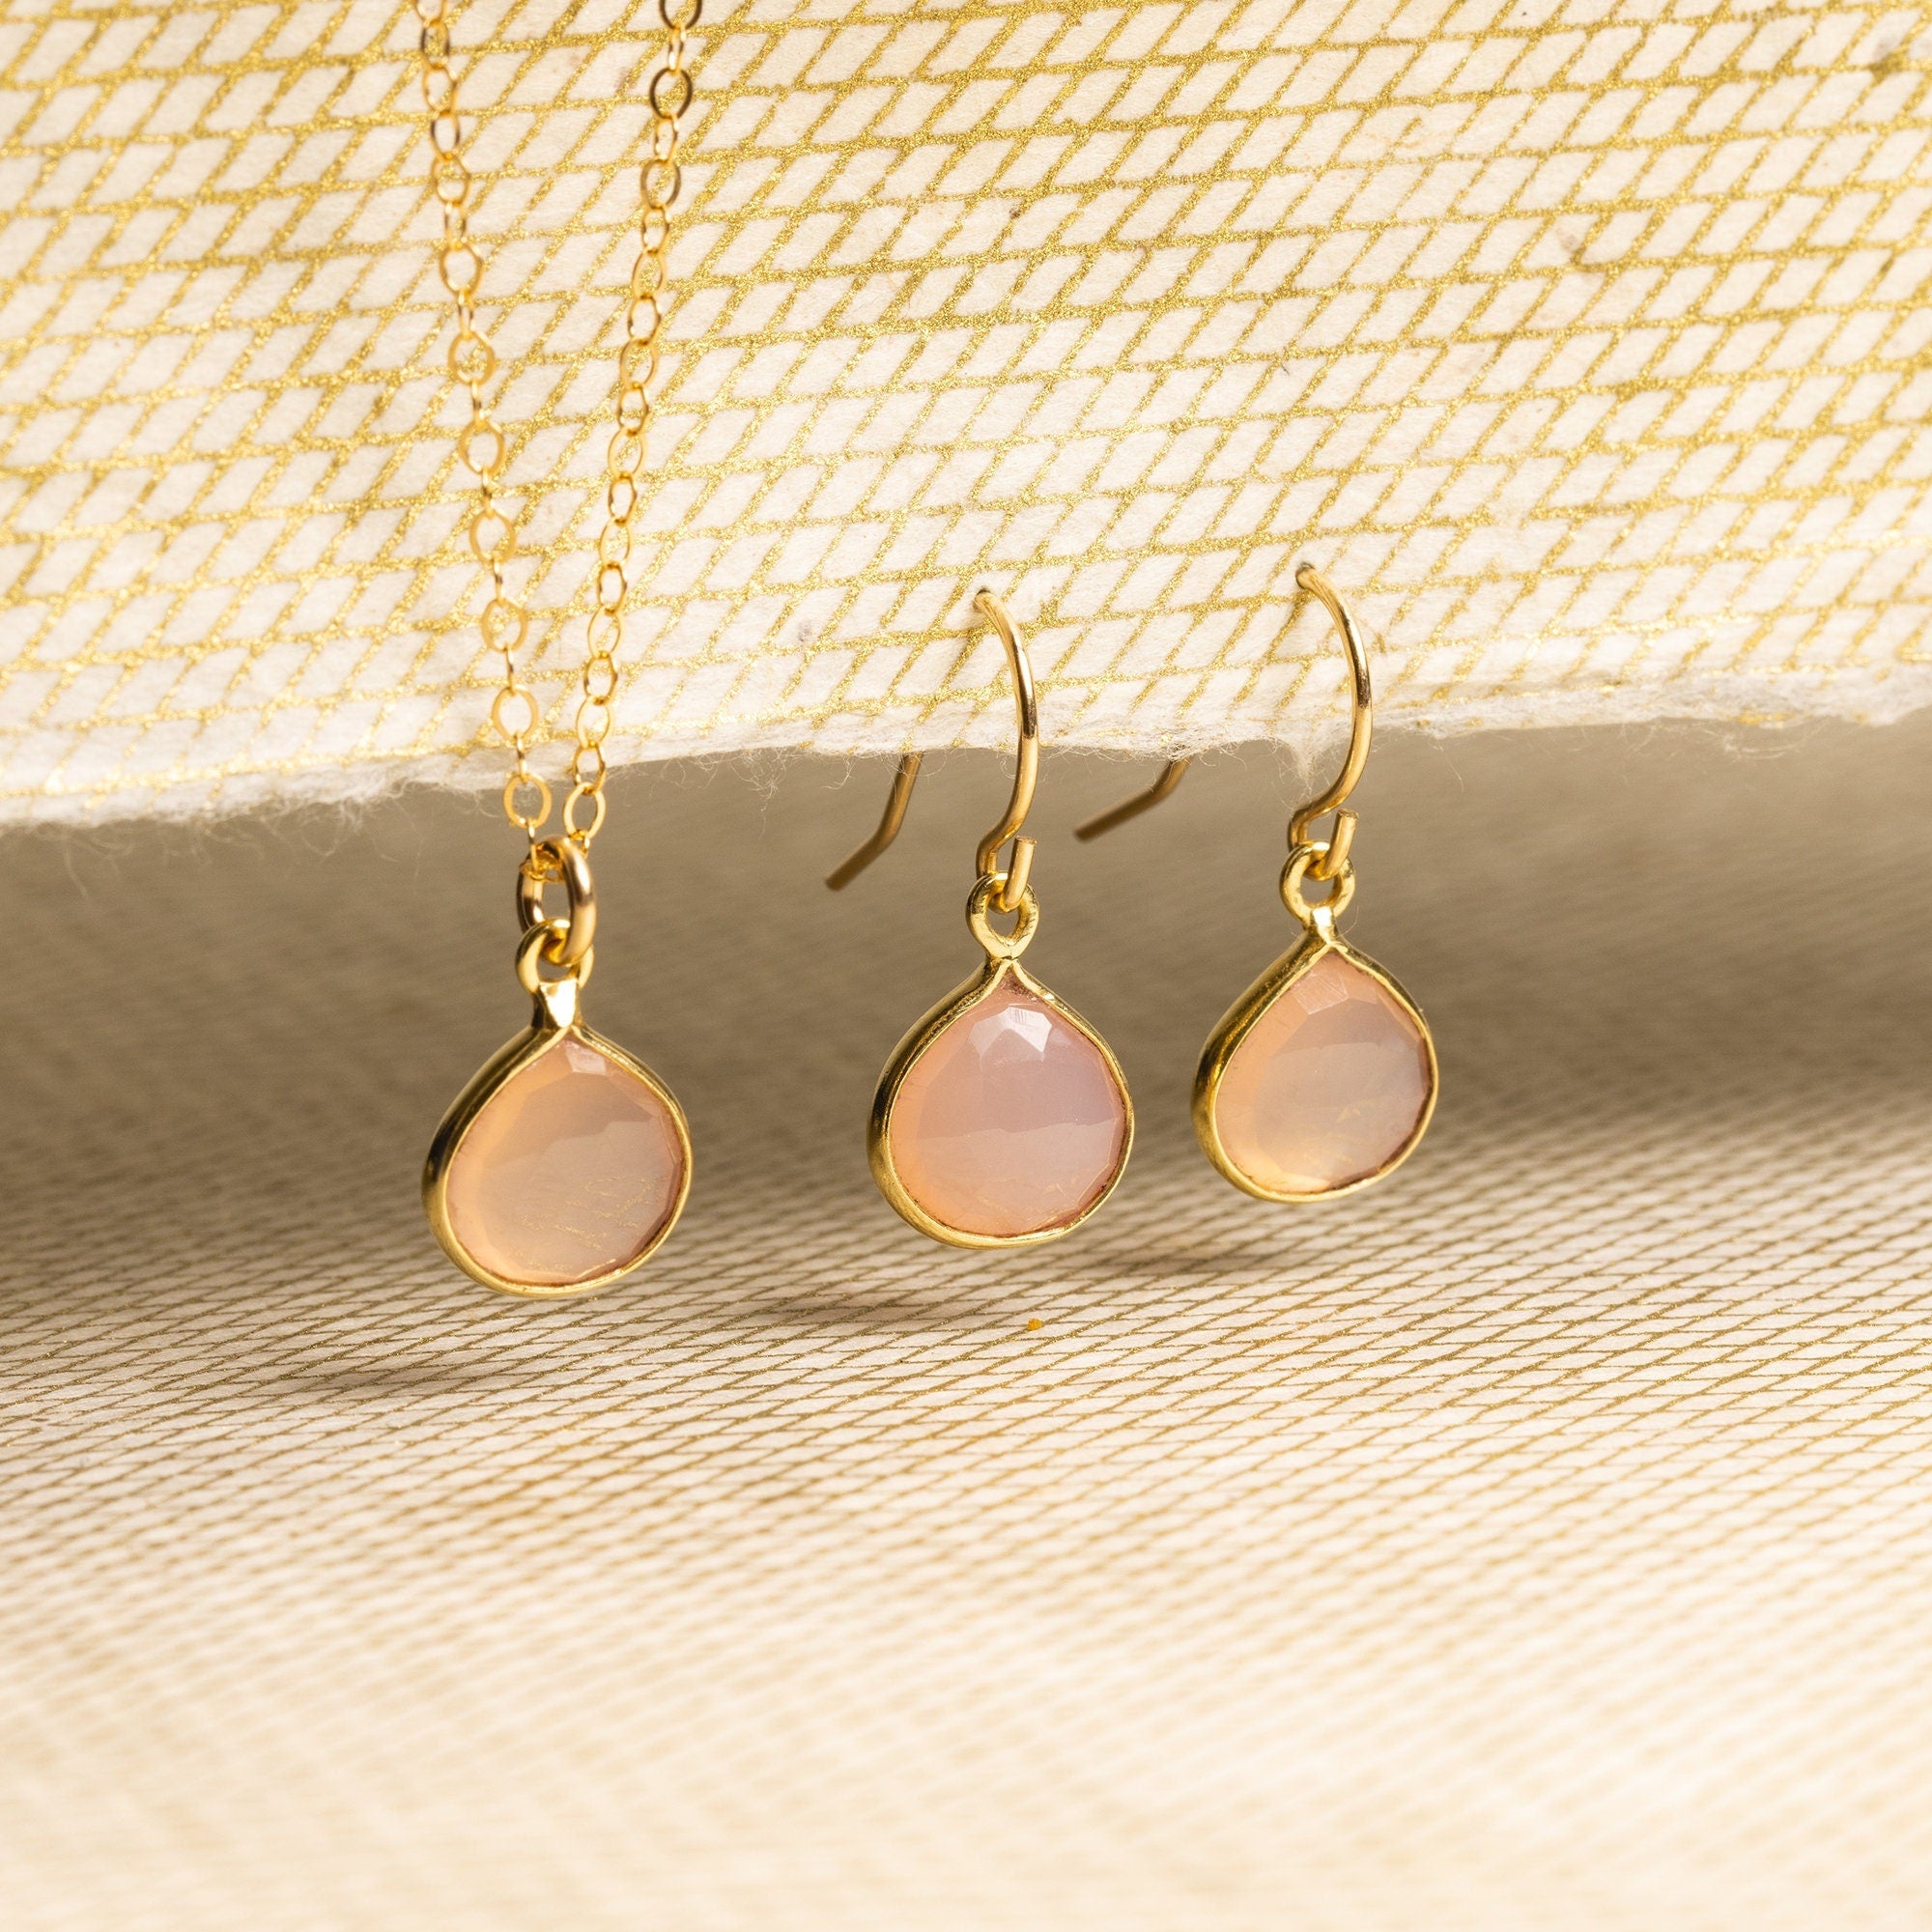 Pink Chalcedony Necklace and Drop Earrings Matching Set - Delicate, Dainty, minimalist, simple gold jewelry gift for mom, wife, daughter Necklace and Earrings Set Soul & Little Rose   